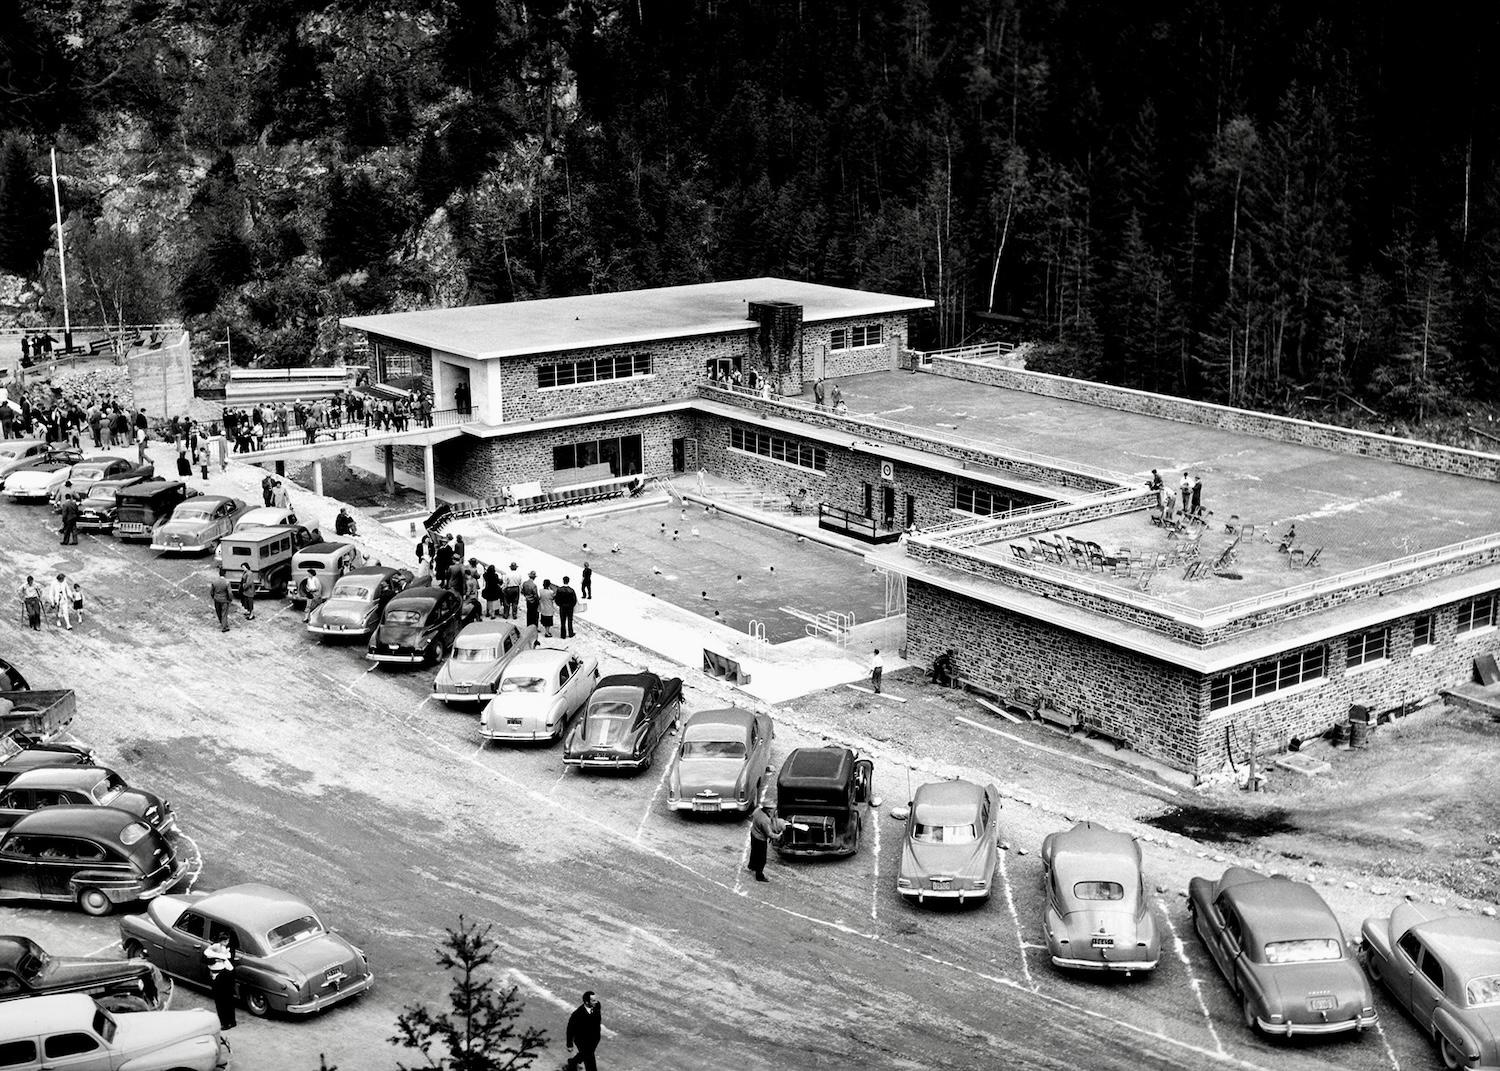 A crowd was on hand for the 1951 opening of the Radium Hot Springs Aquacourt building.